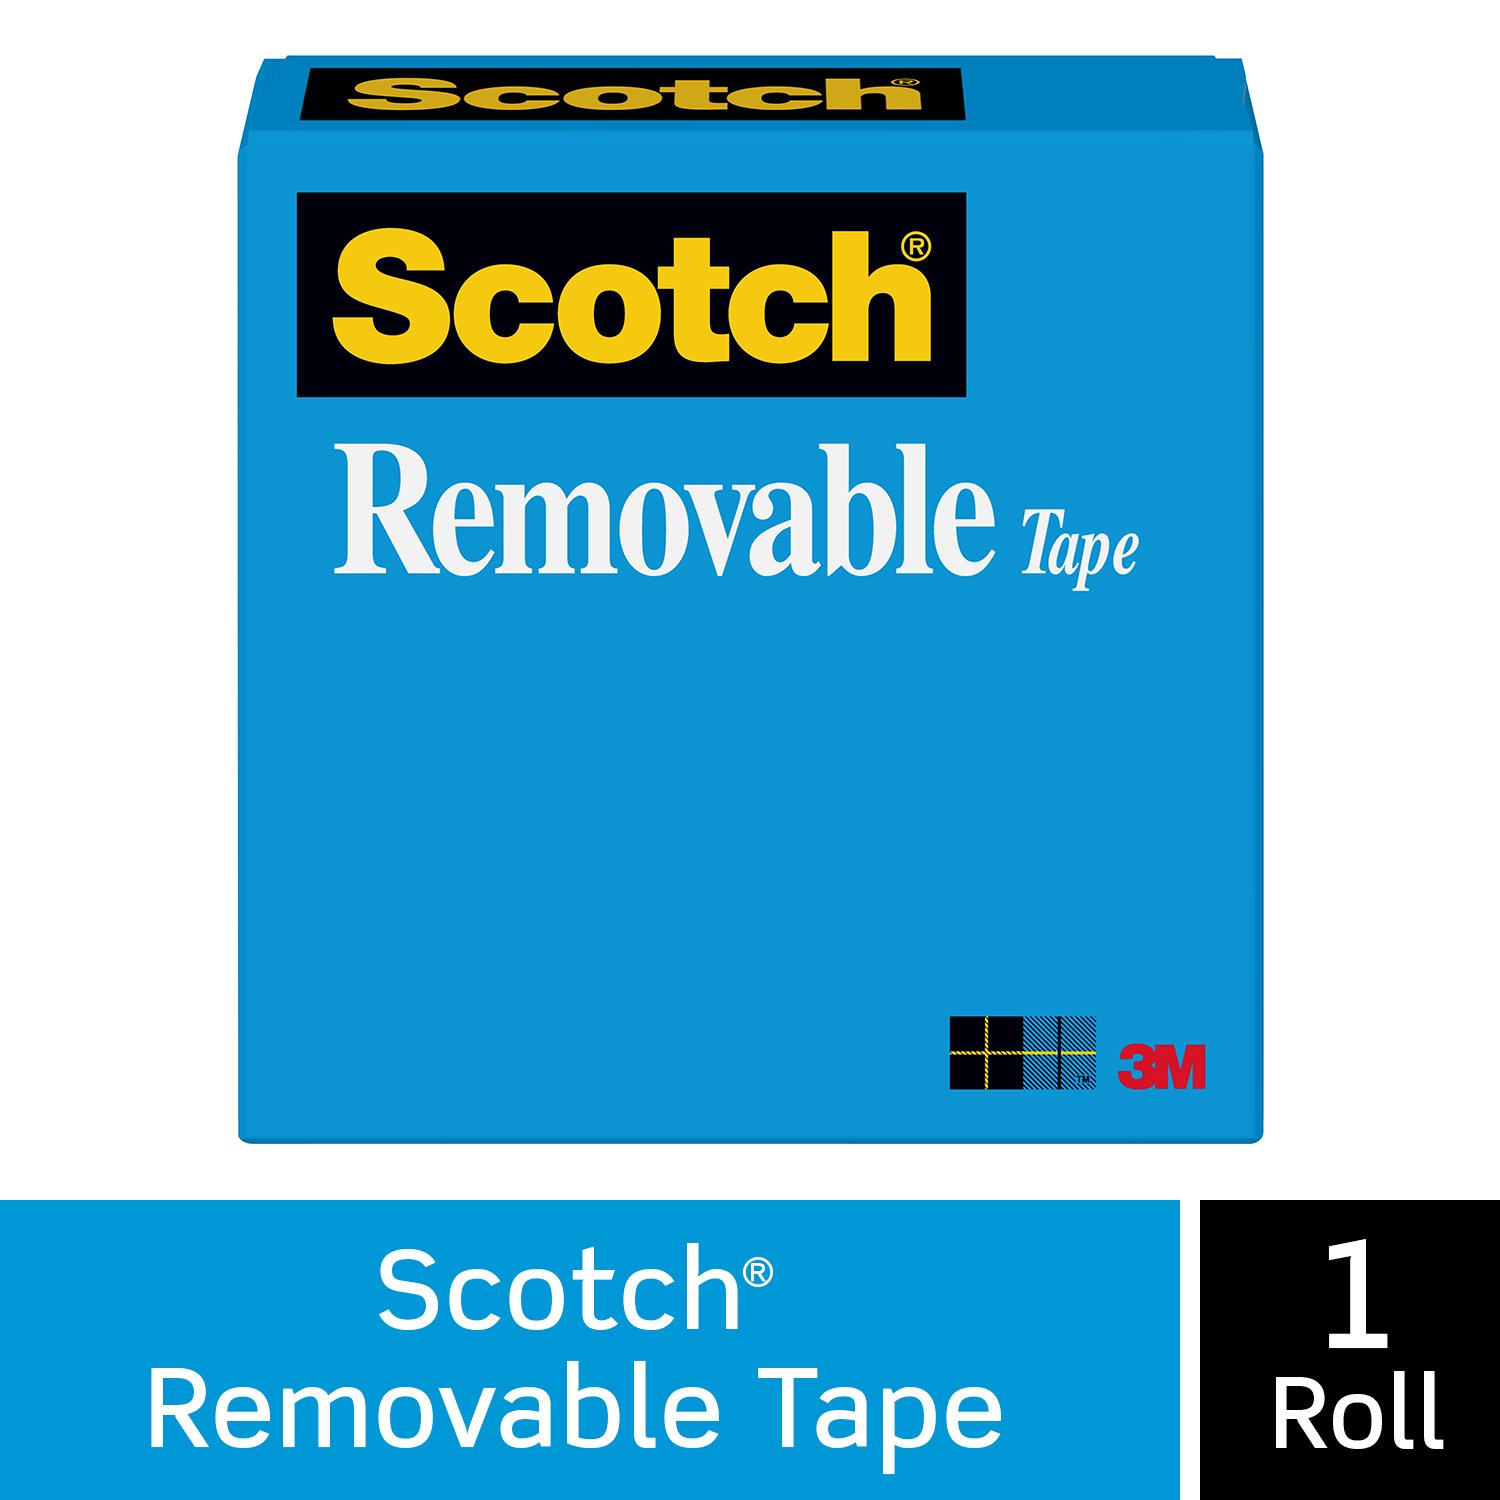 7010338319 - Scotch Removable Tape 811, 1 in x 2592 in Boxed